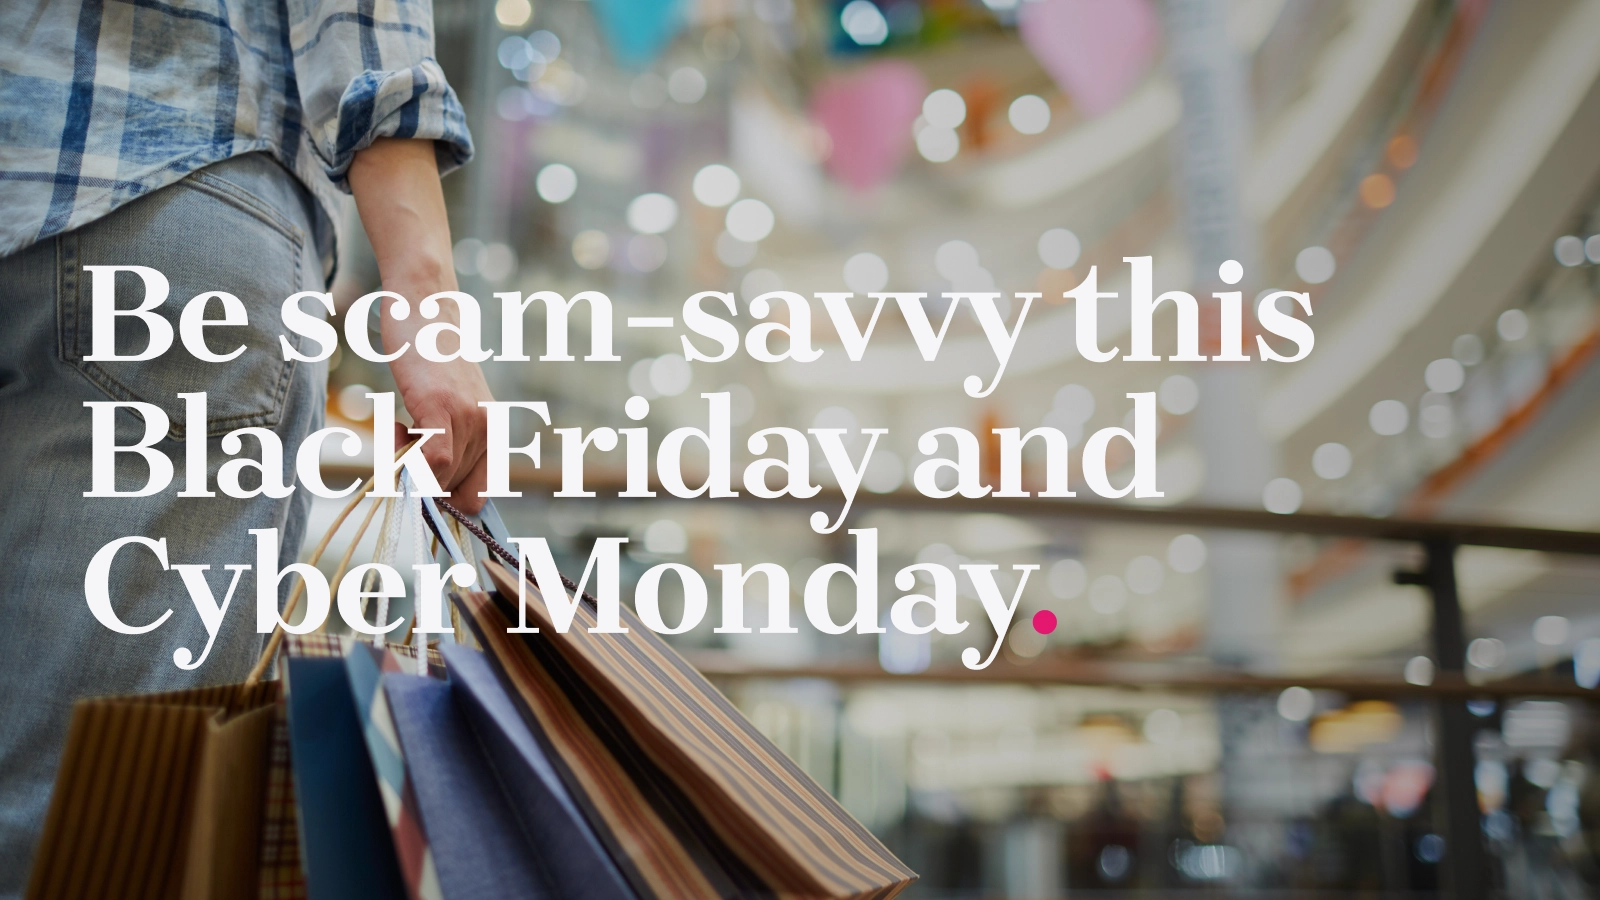 Be scam-savvy this Black Friday and Cyber Monday.